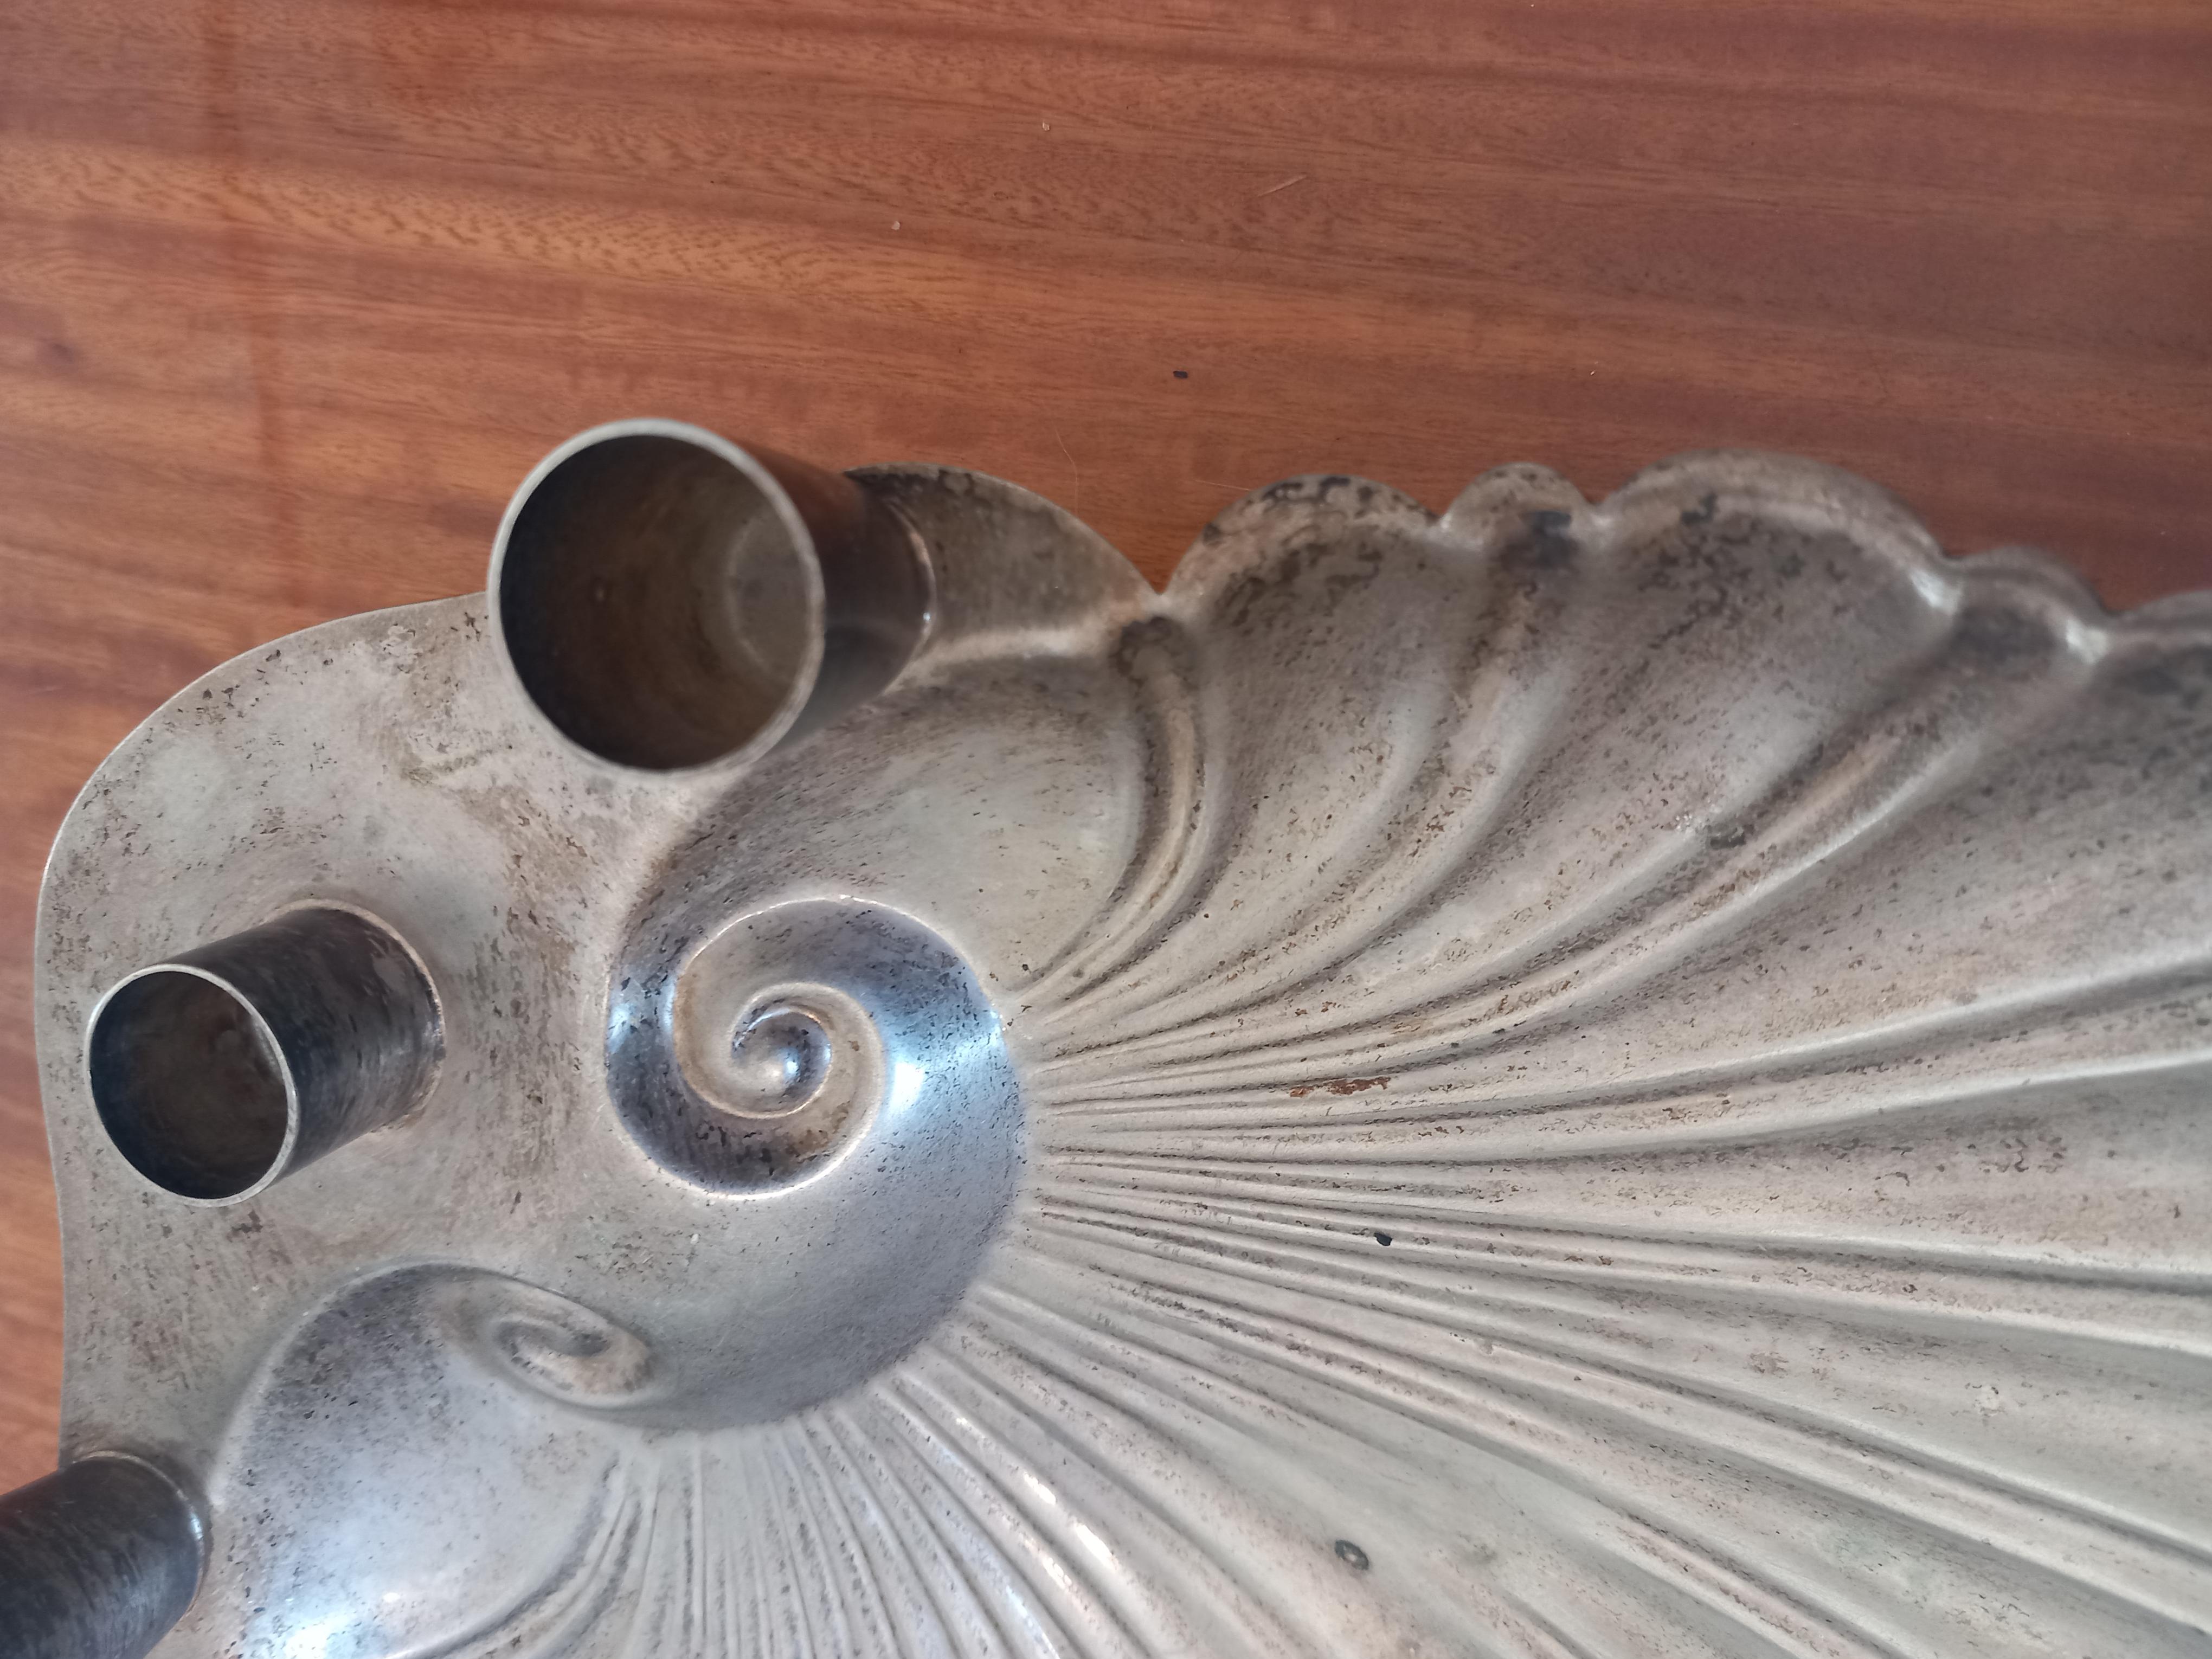 Candelabra or candle holder in the shape of a shell for 3 candles.

Metallic shell shape, silver, could be alpaca full-aged or nikel. I don't know what metal it is but it's very nice. It also has the patina of time, but it has no color wear.
